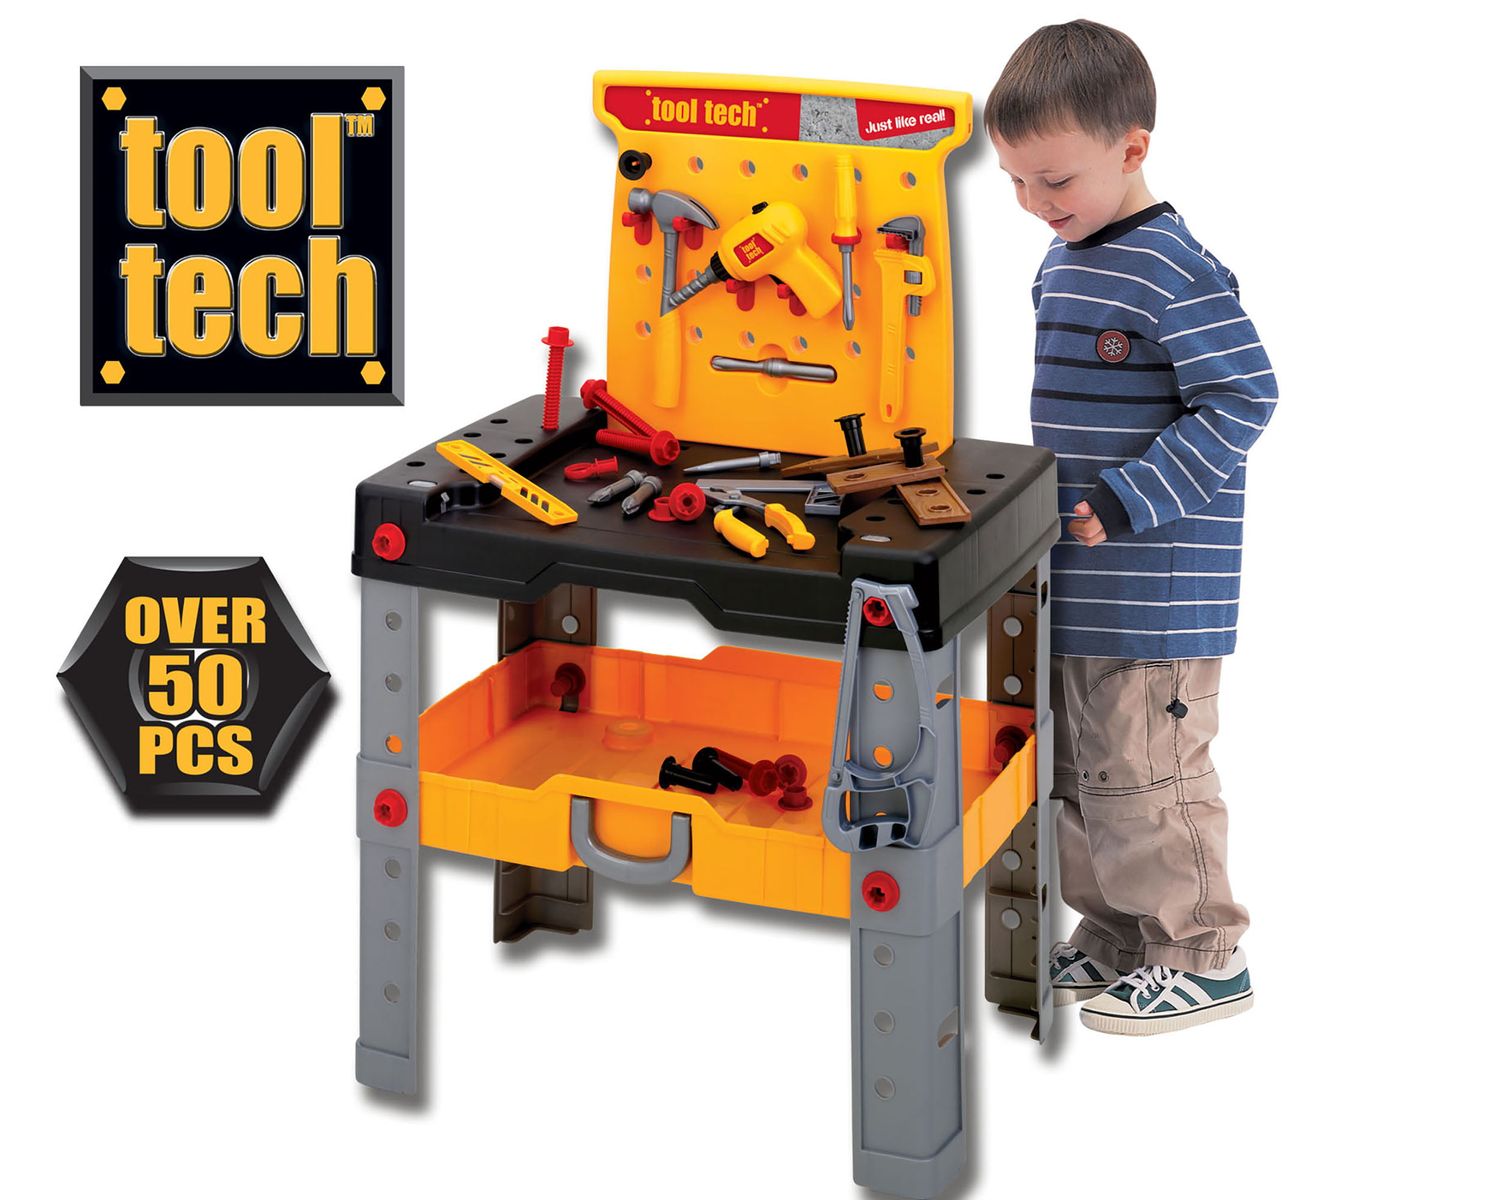 [RDY] [送料無料] Red Box - Tool Tech Take Along Work Bench - 50+ pieces, folds up [楽天海外通販] | Red Box - Tool Tech Take Along Work Bench - 50+ Pieces, Folds up